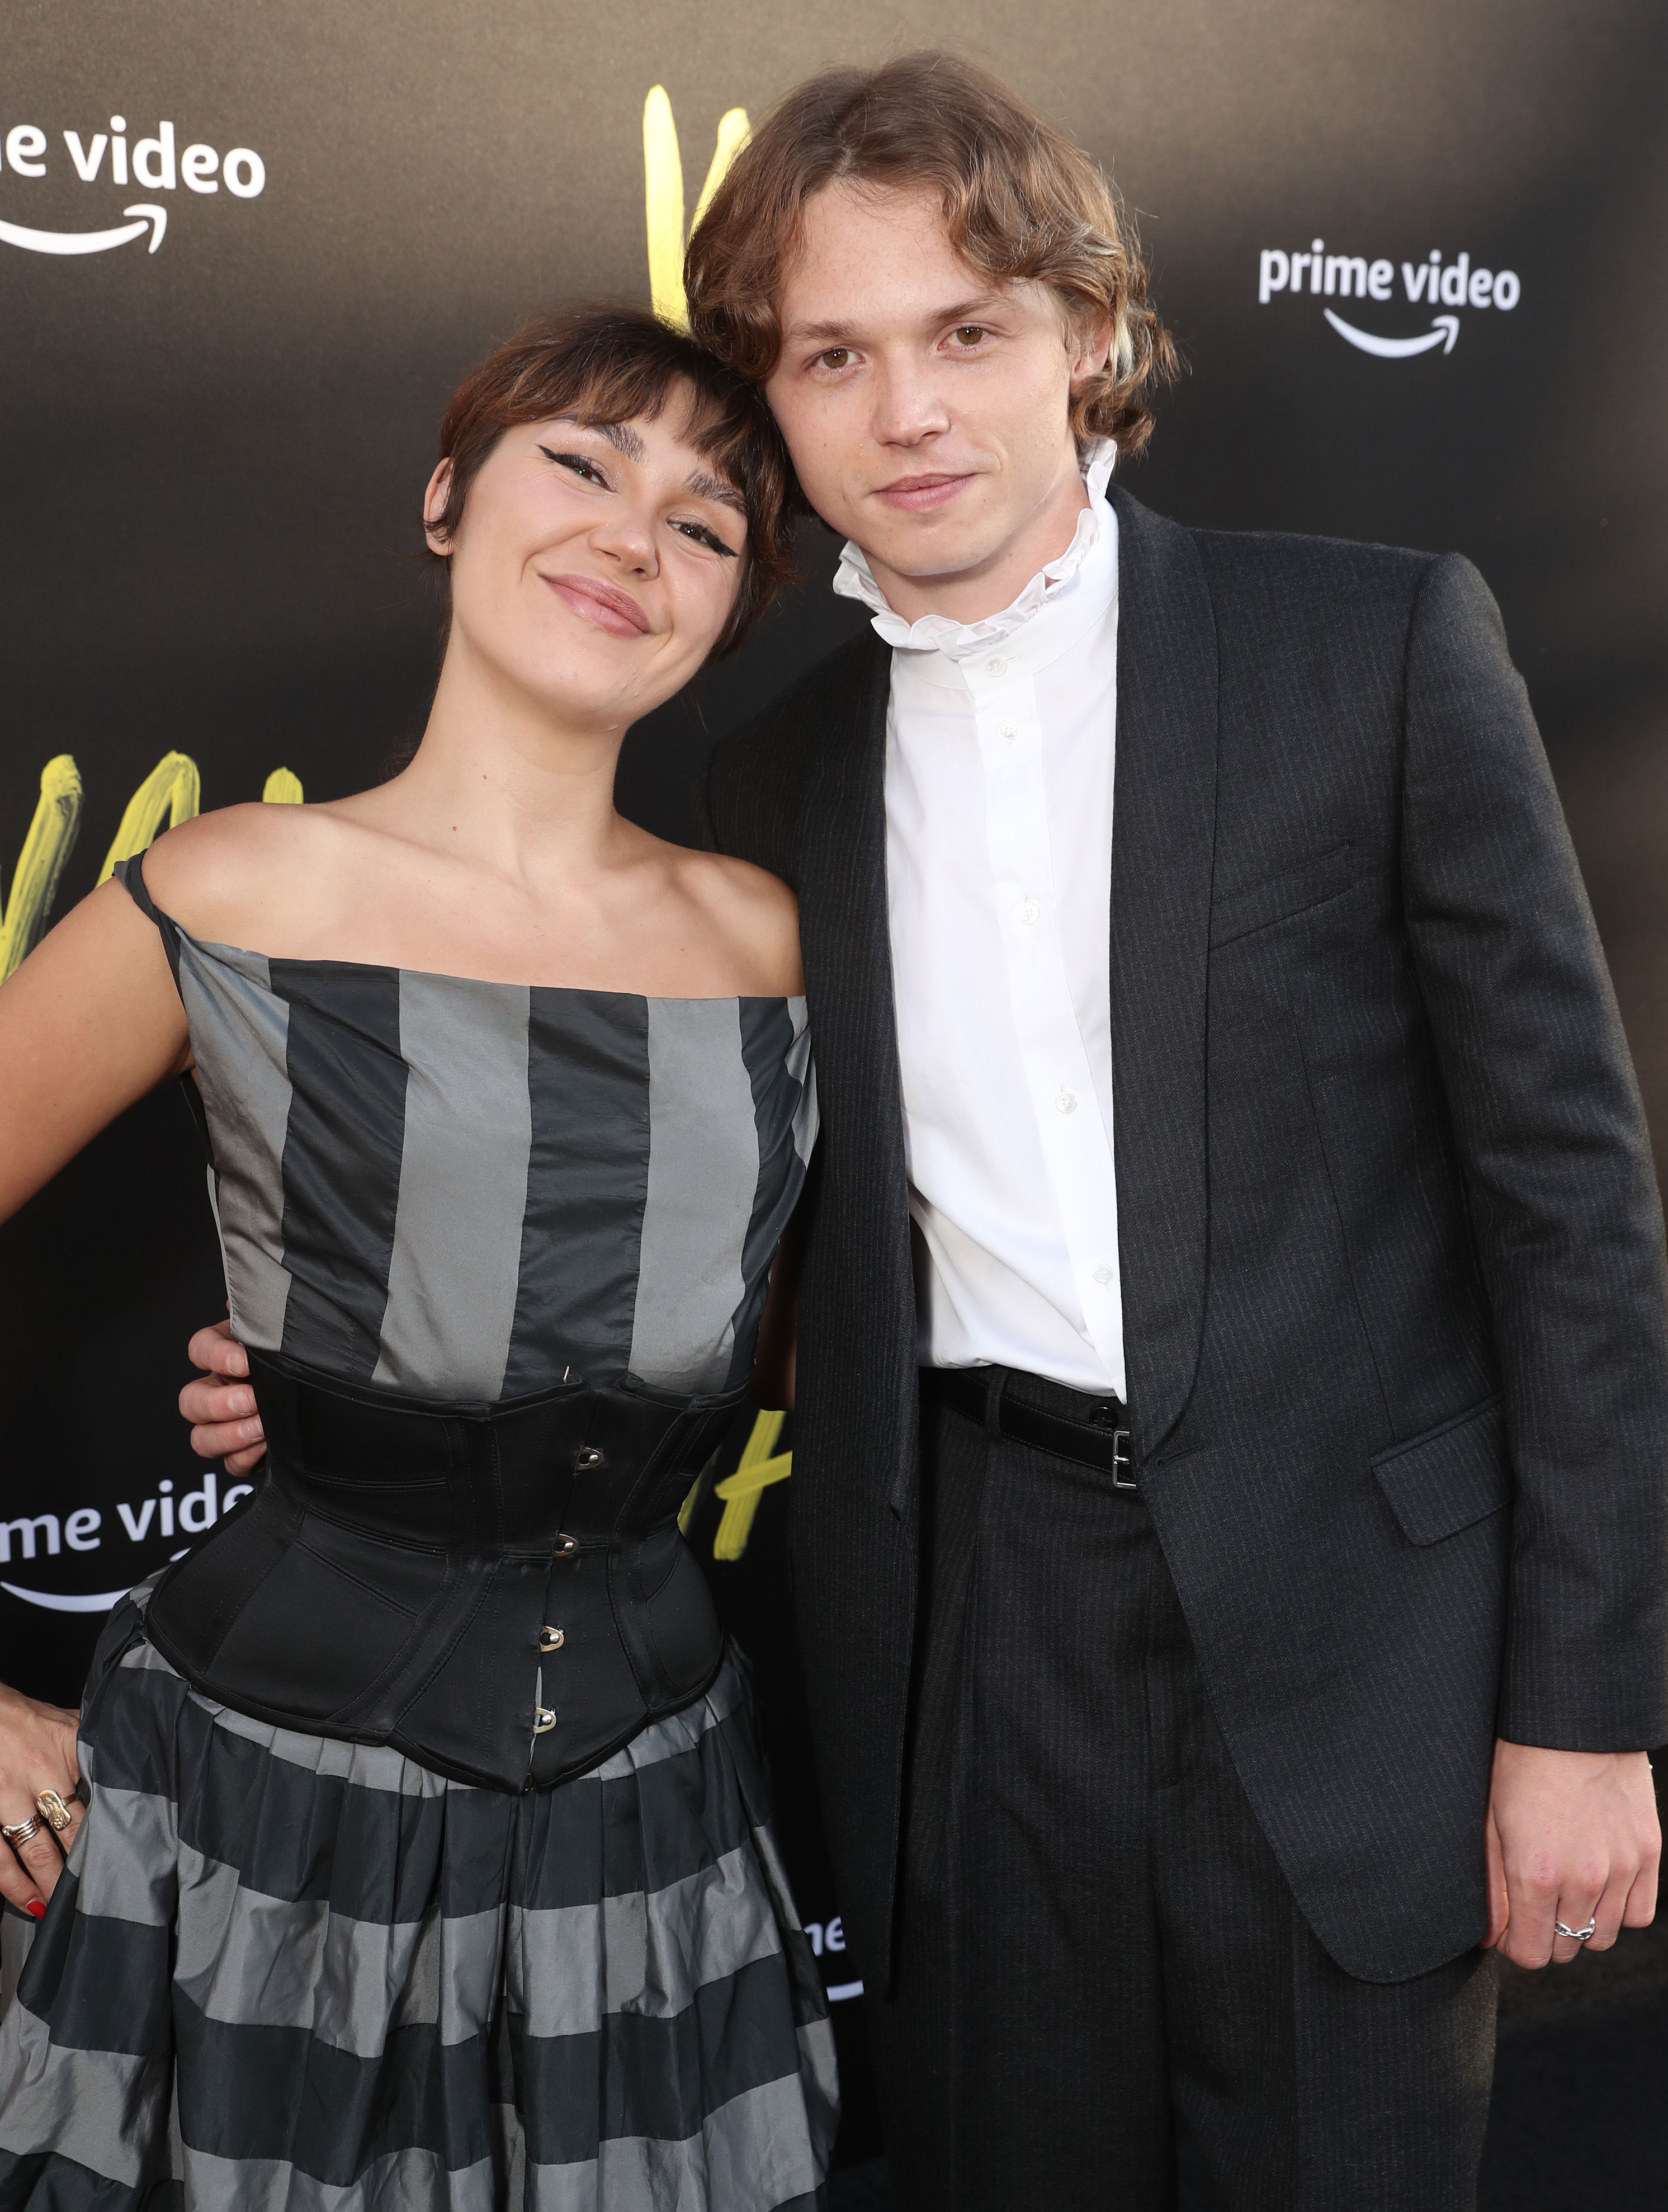 <p>Mercedes Kilmer (who was born in 1991) and Jack Kilmer (who was born in 1995) attended the Los Angeles premiere of "Val" -- a documentary about their father, Val Kilmer -- on Aug. 3, 2021. Val's children with British actress Joanne Whalley, who are both actors like their parents, served as producers on the project, which debuted in theaters on July 23, 2021, and on Amazon Prime Video on Aug. 6, 2021. </p>